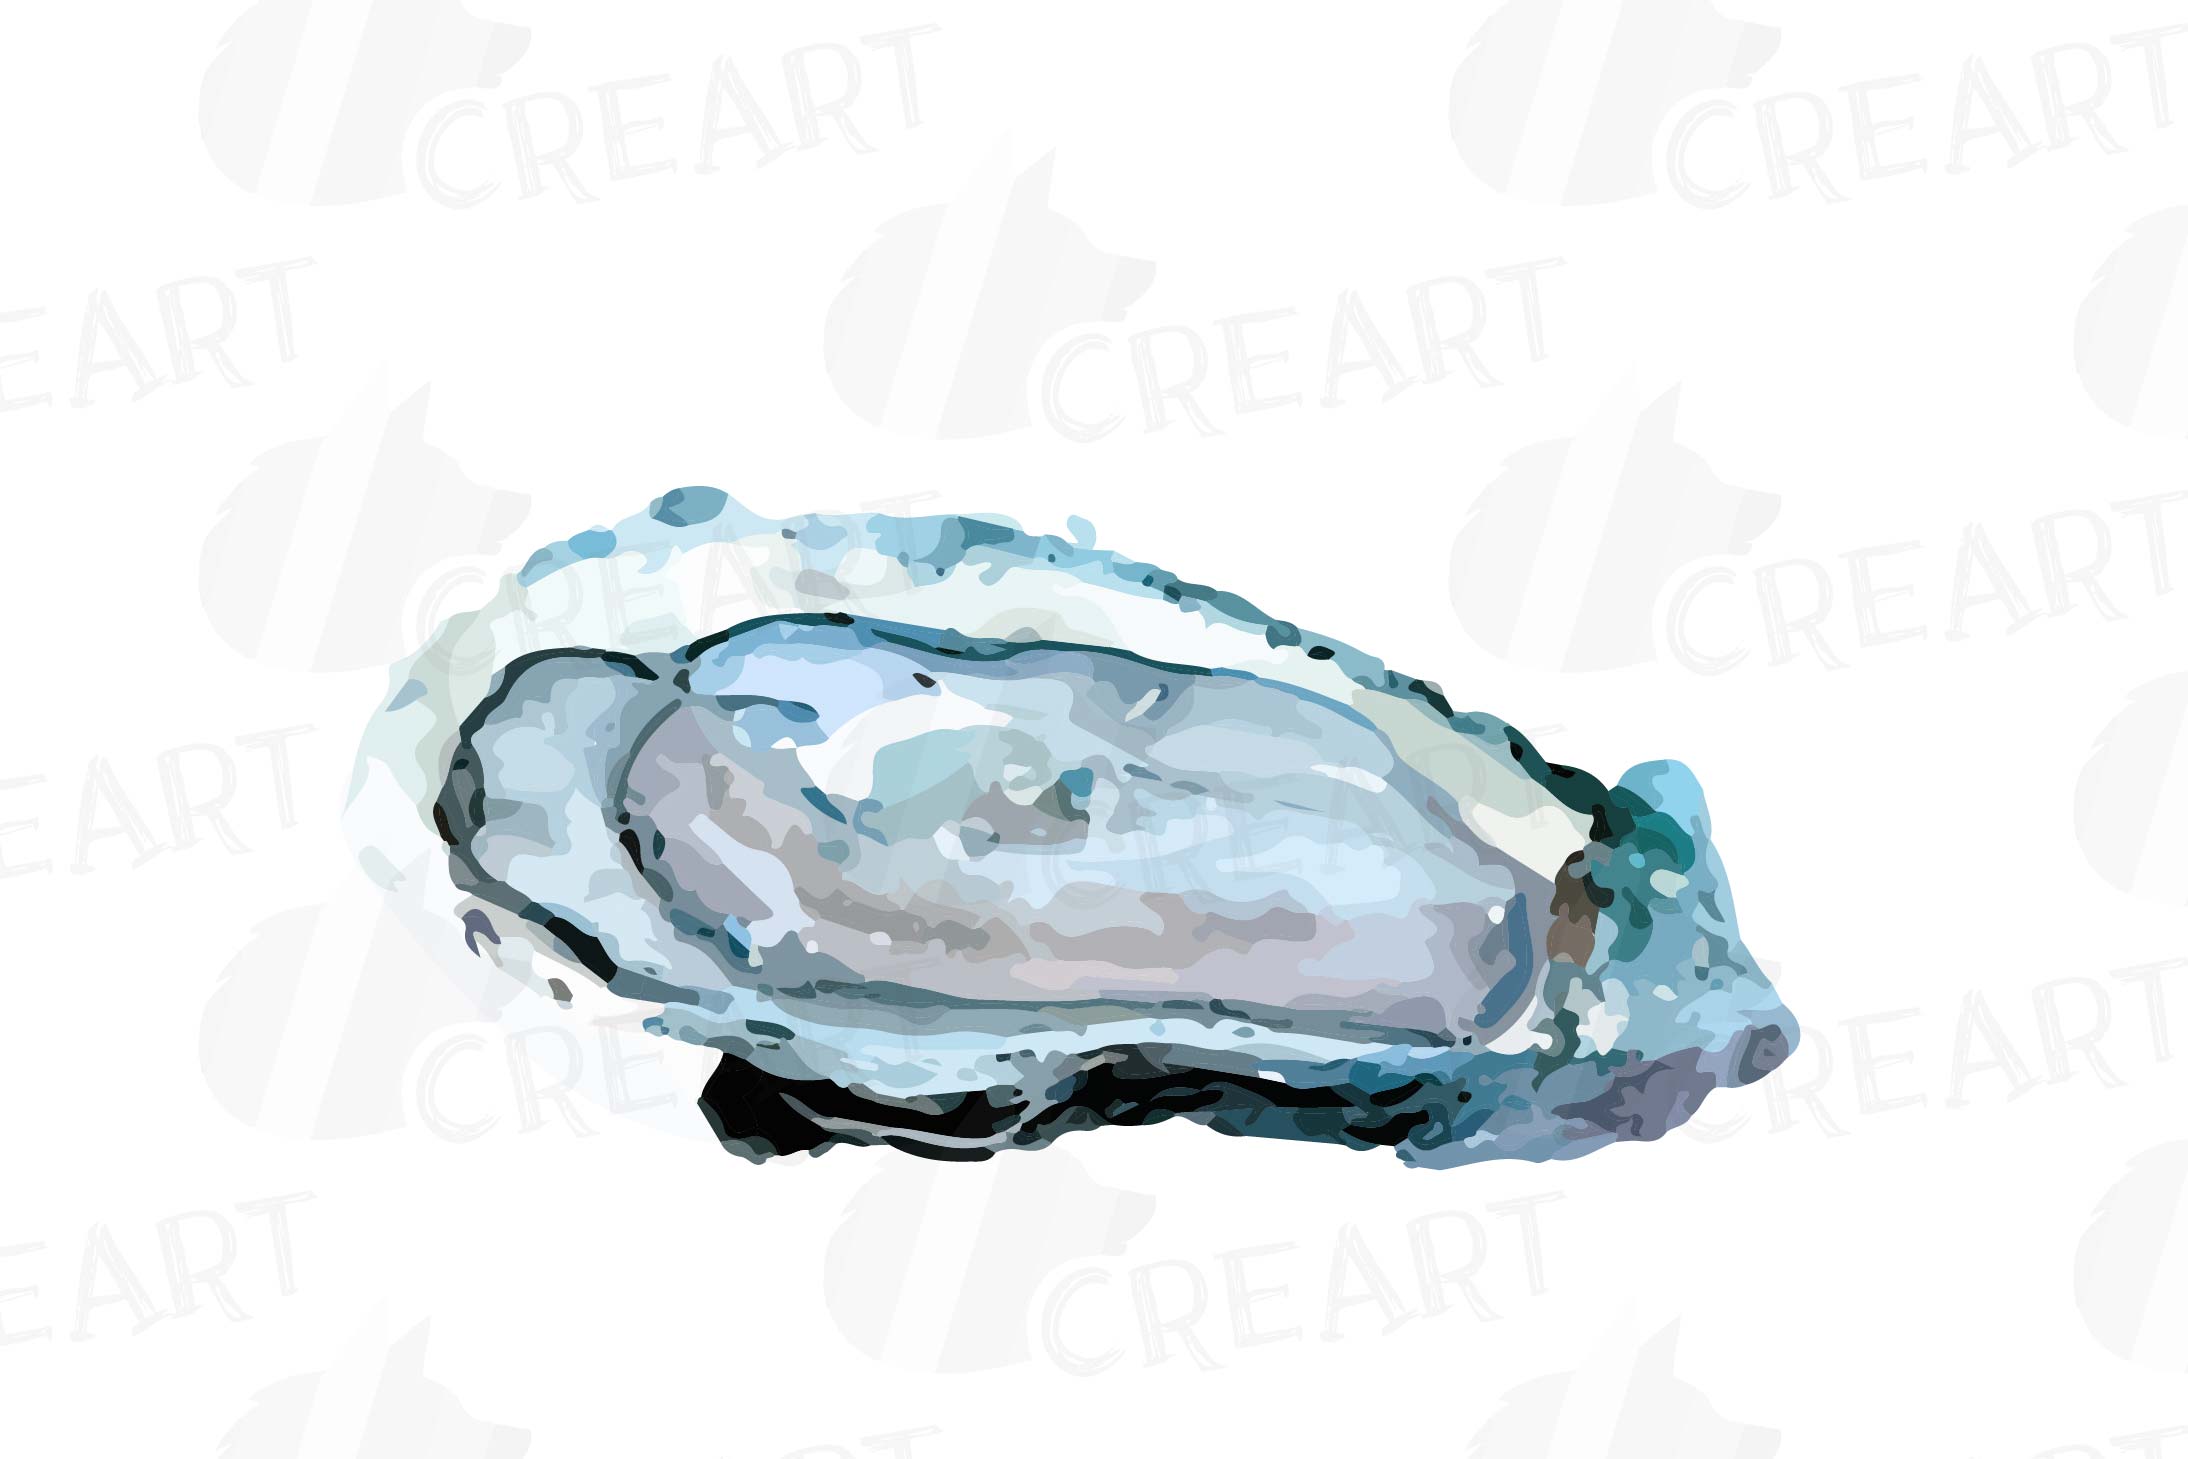 Oyster watercolor clip art pack, seafood illustration collec